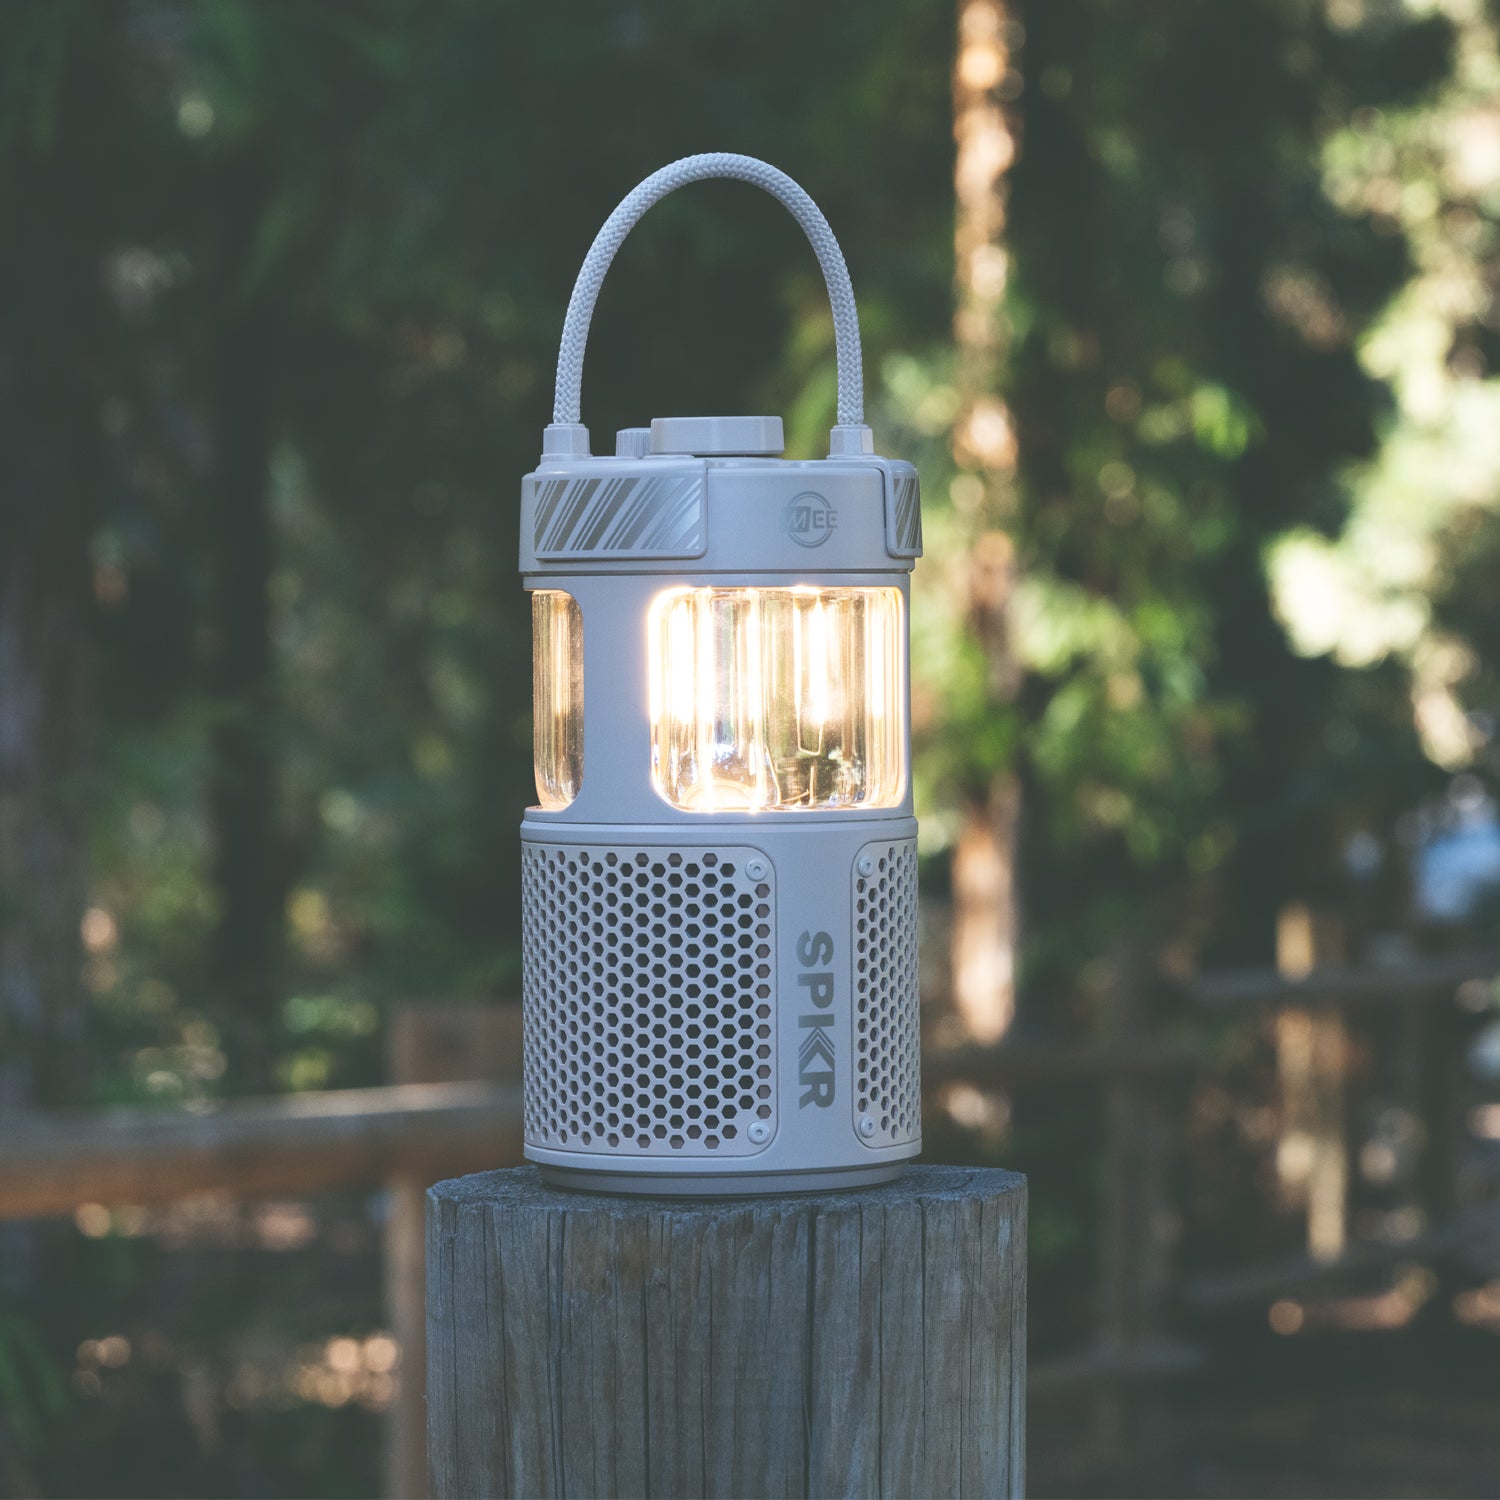 A portable led lantern sits atop a wooden post in a forest, emitting a warm glow with trees softly blurred in the background. the lantern is white with a gray handle and marked with the logo "spkr.